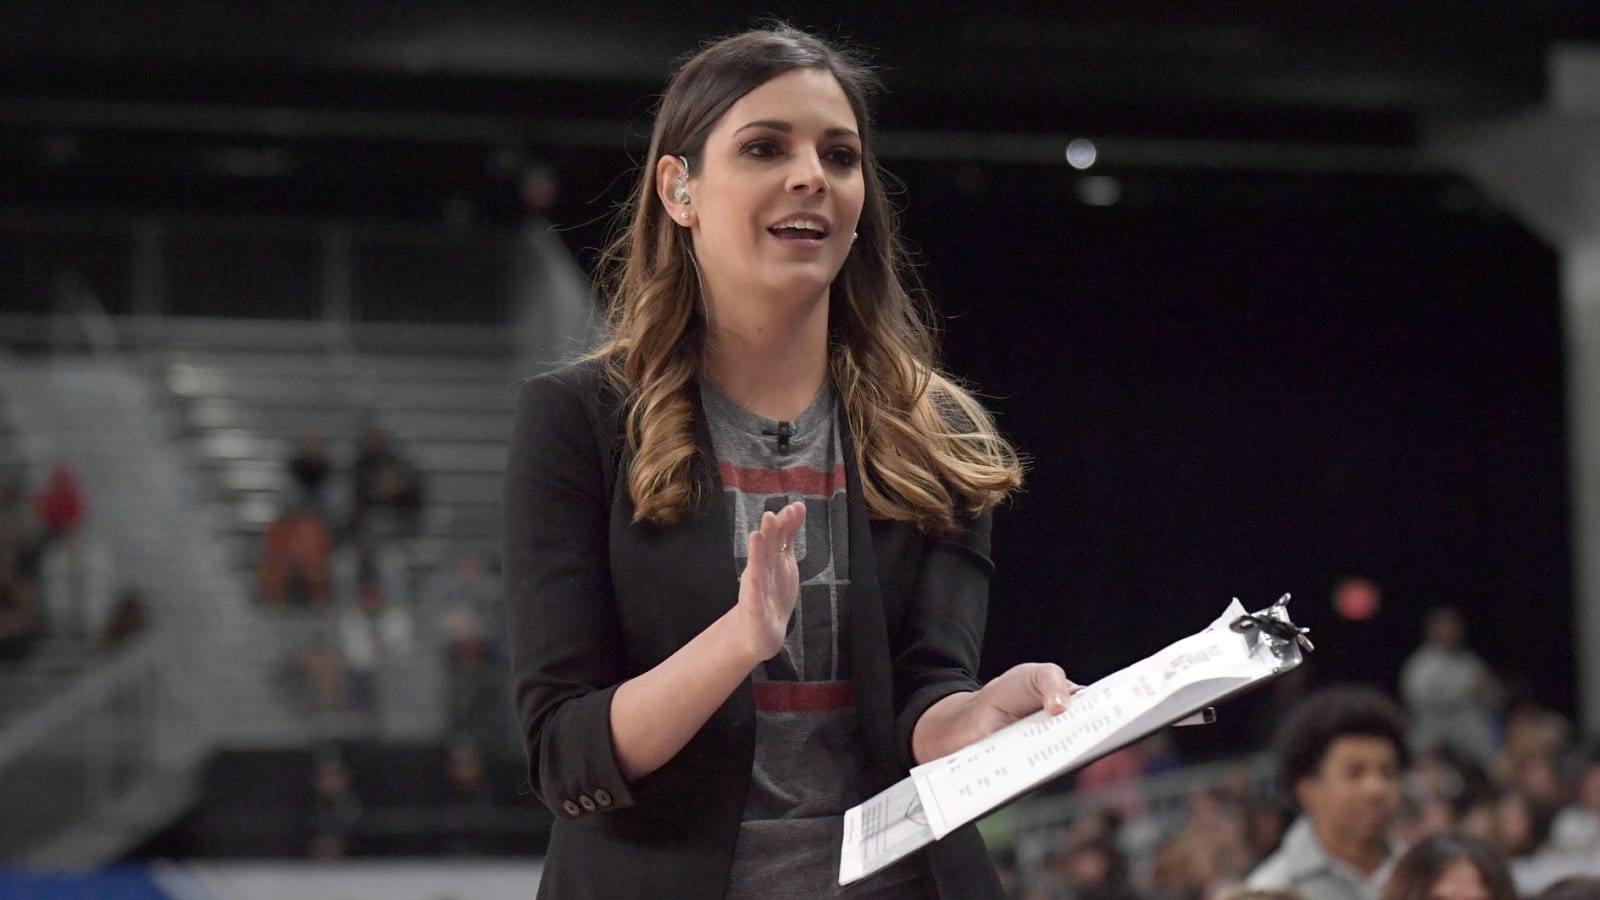 Katie Nolan’s show reportedly canceled by ESPN